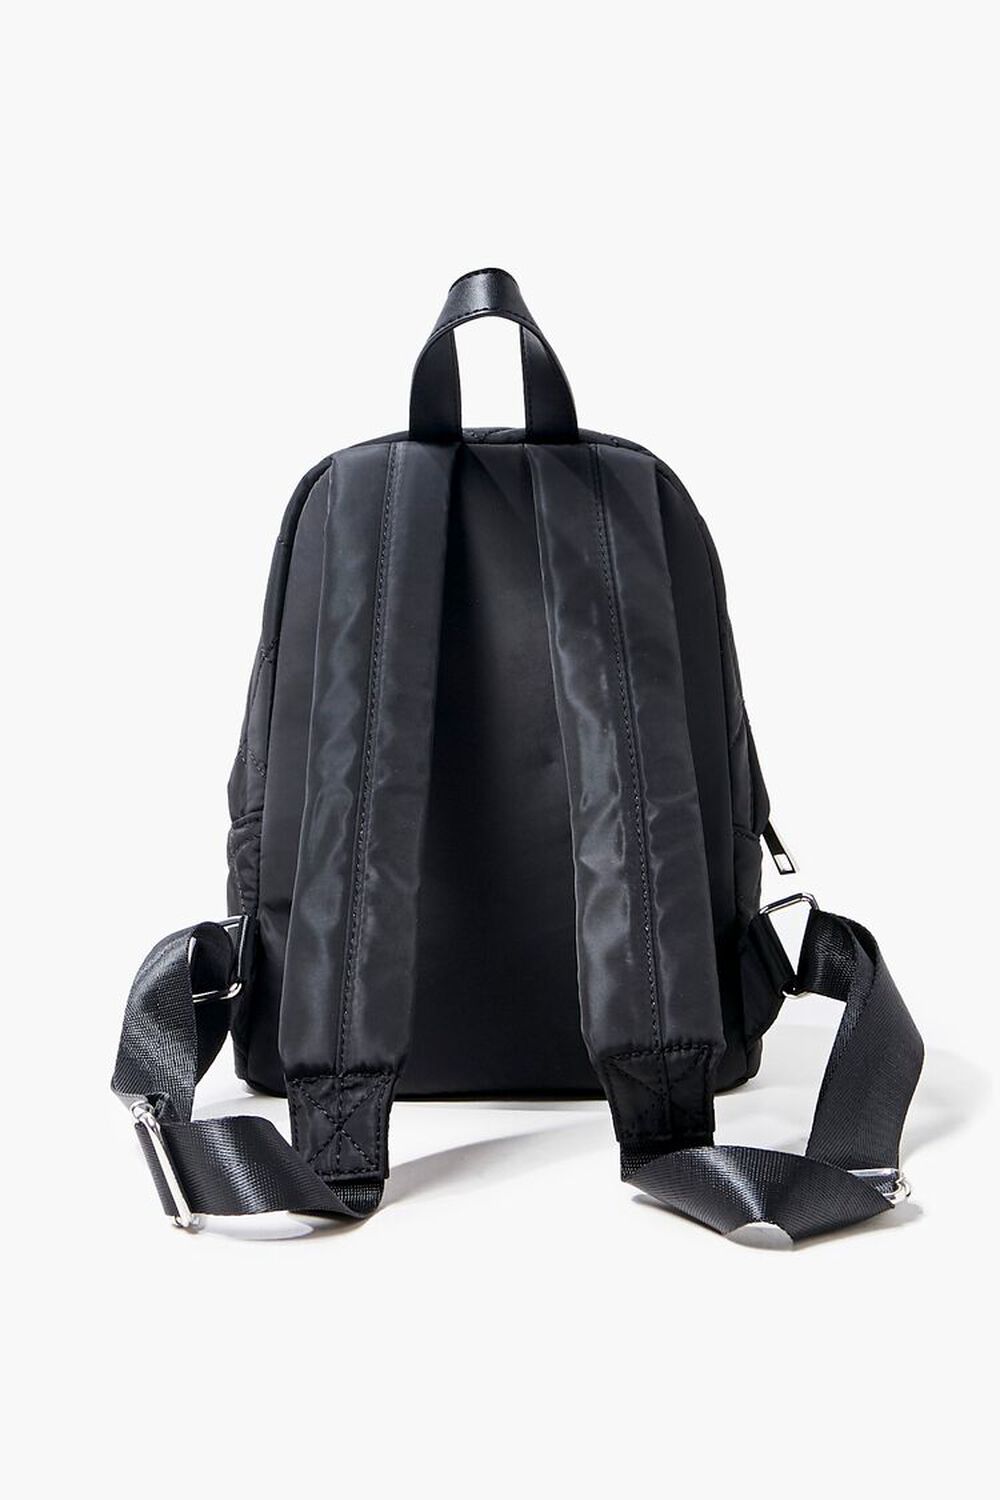 BLACK Quilted Zip-Up Backpack, image 3